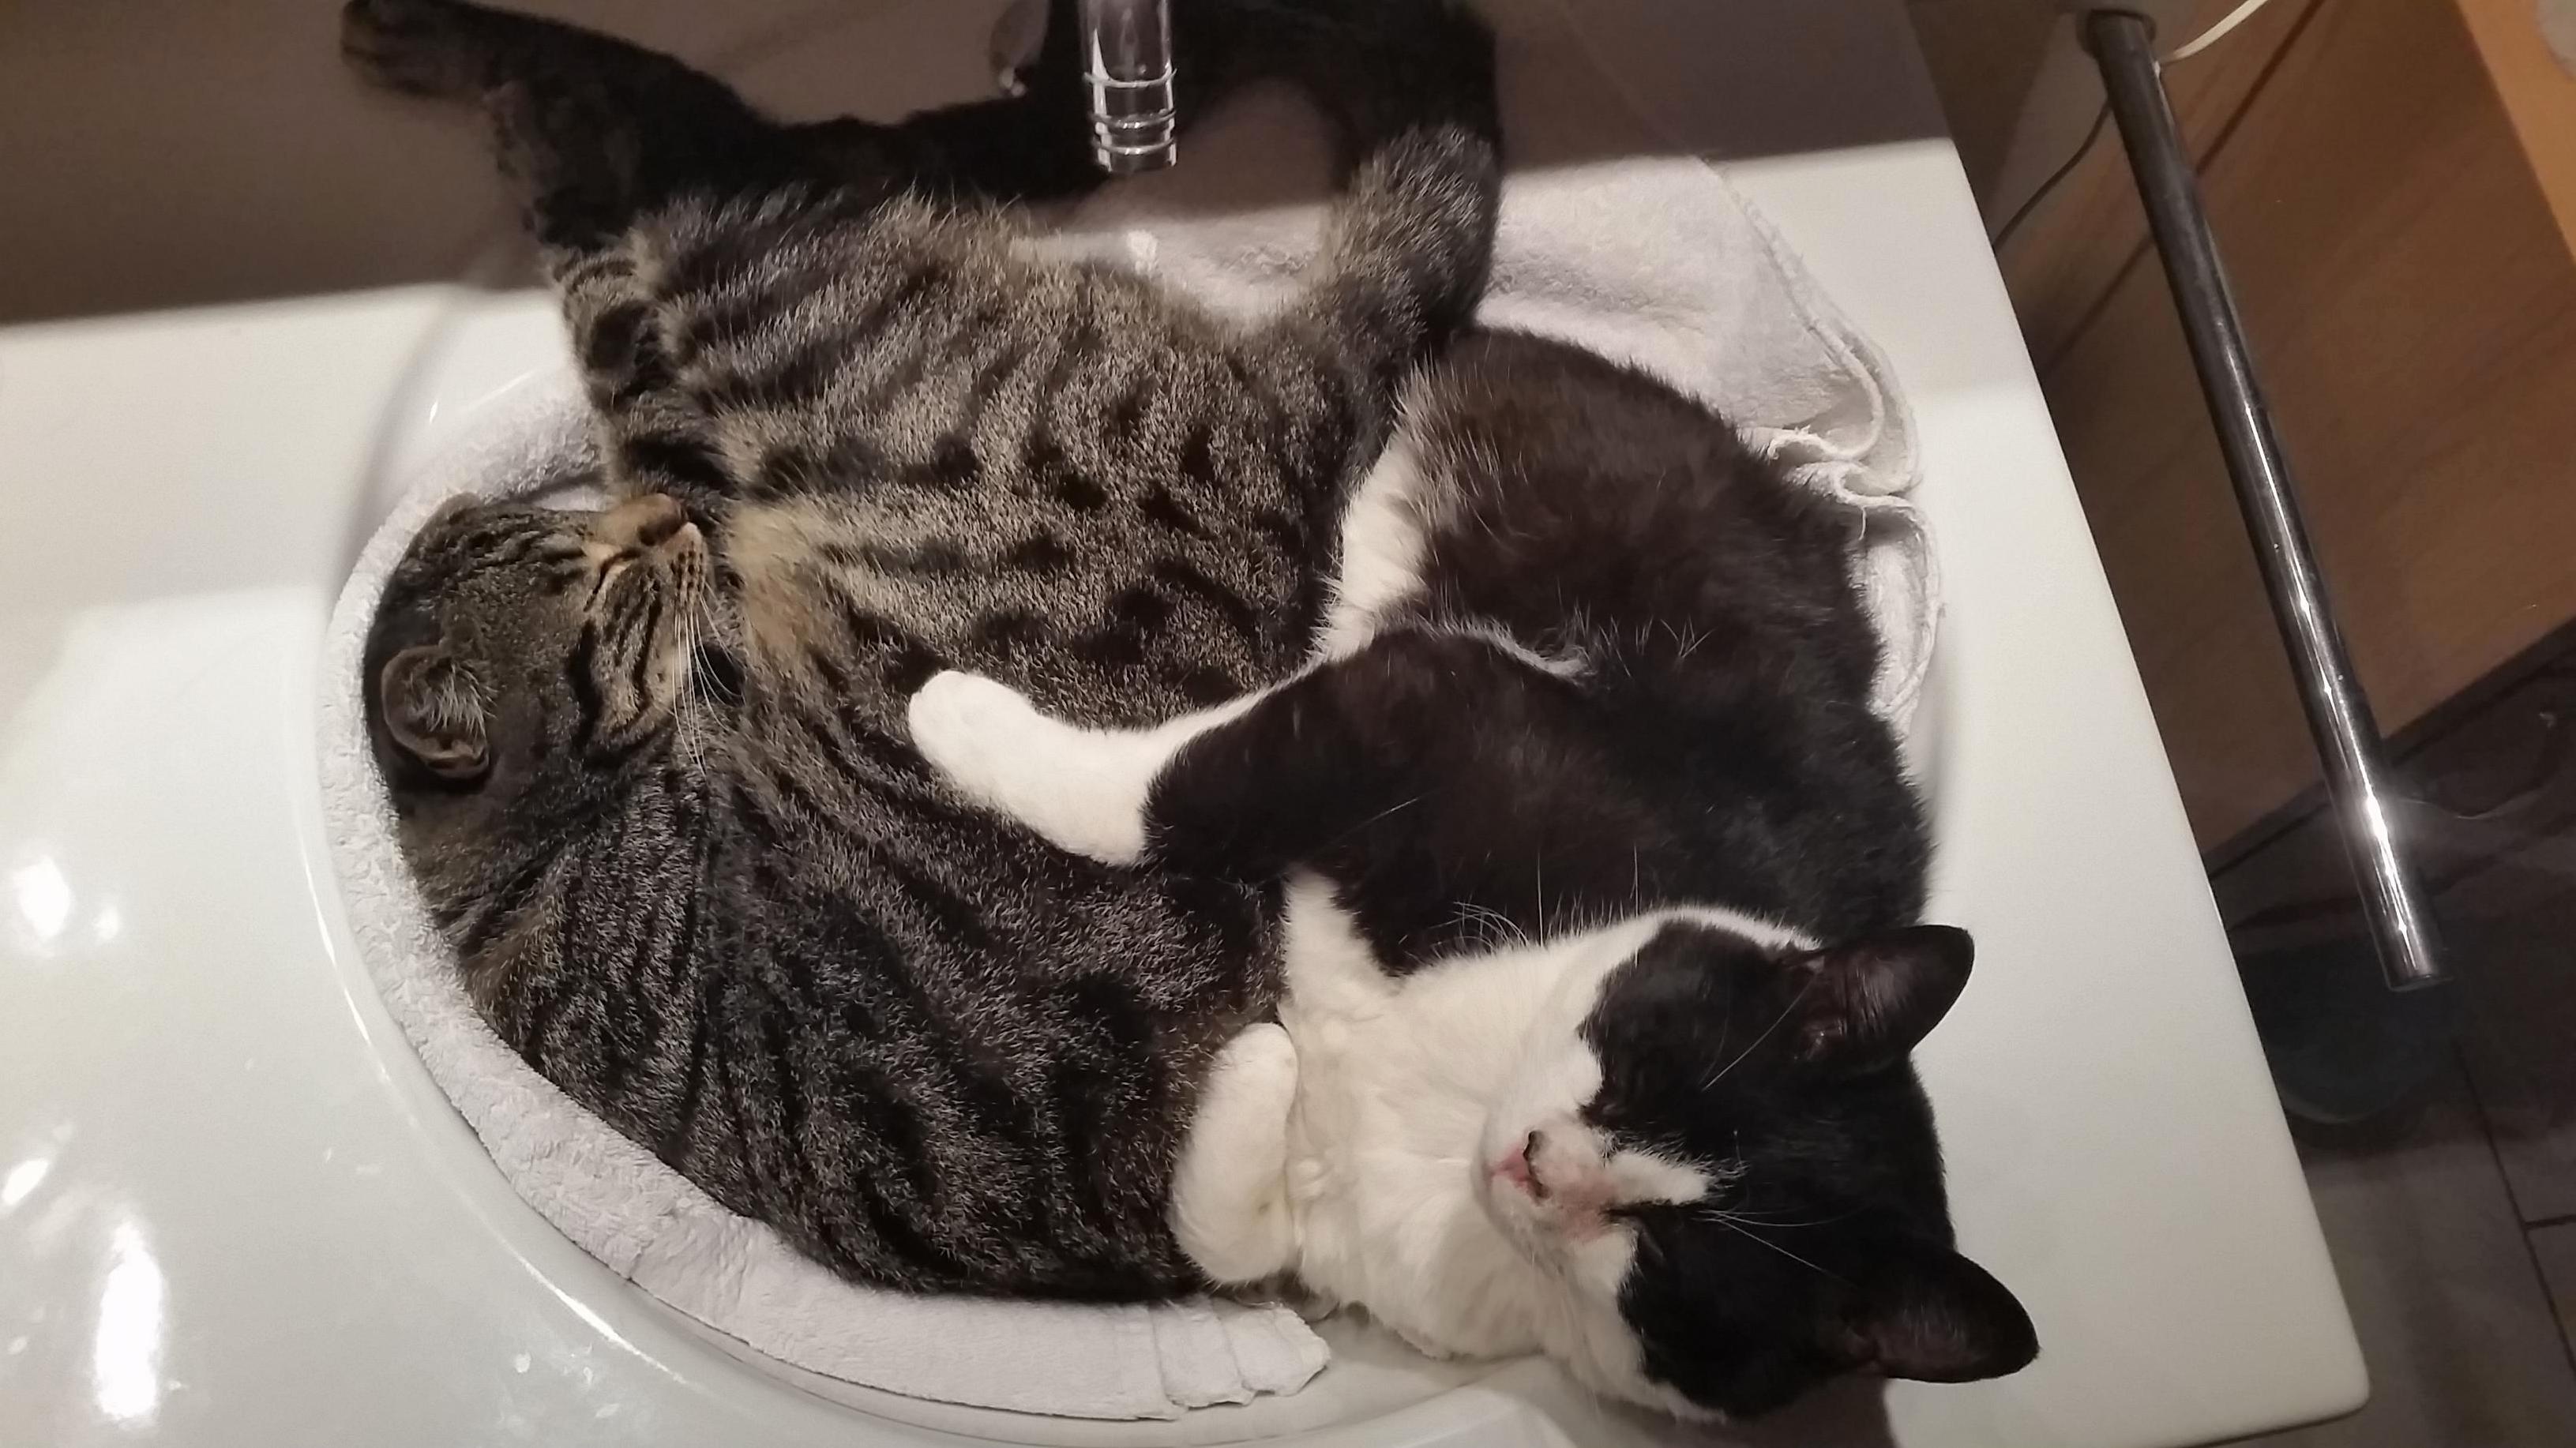 Went to the bathroom at 2 am and found these two cuddling in the sink.